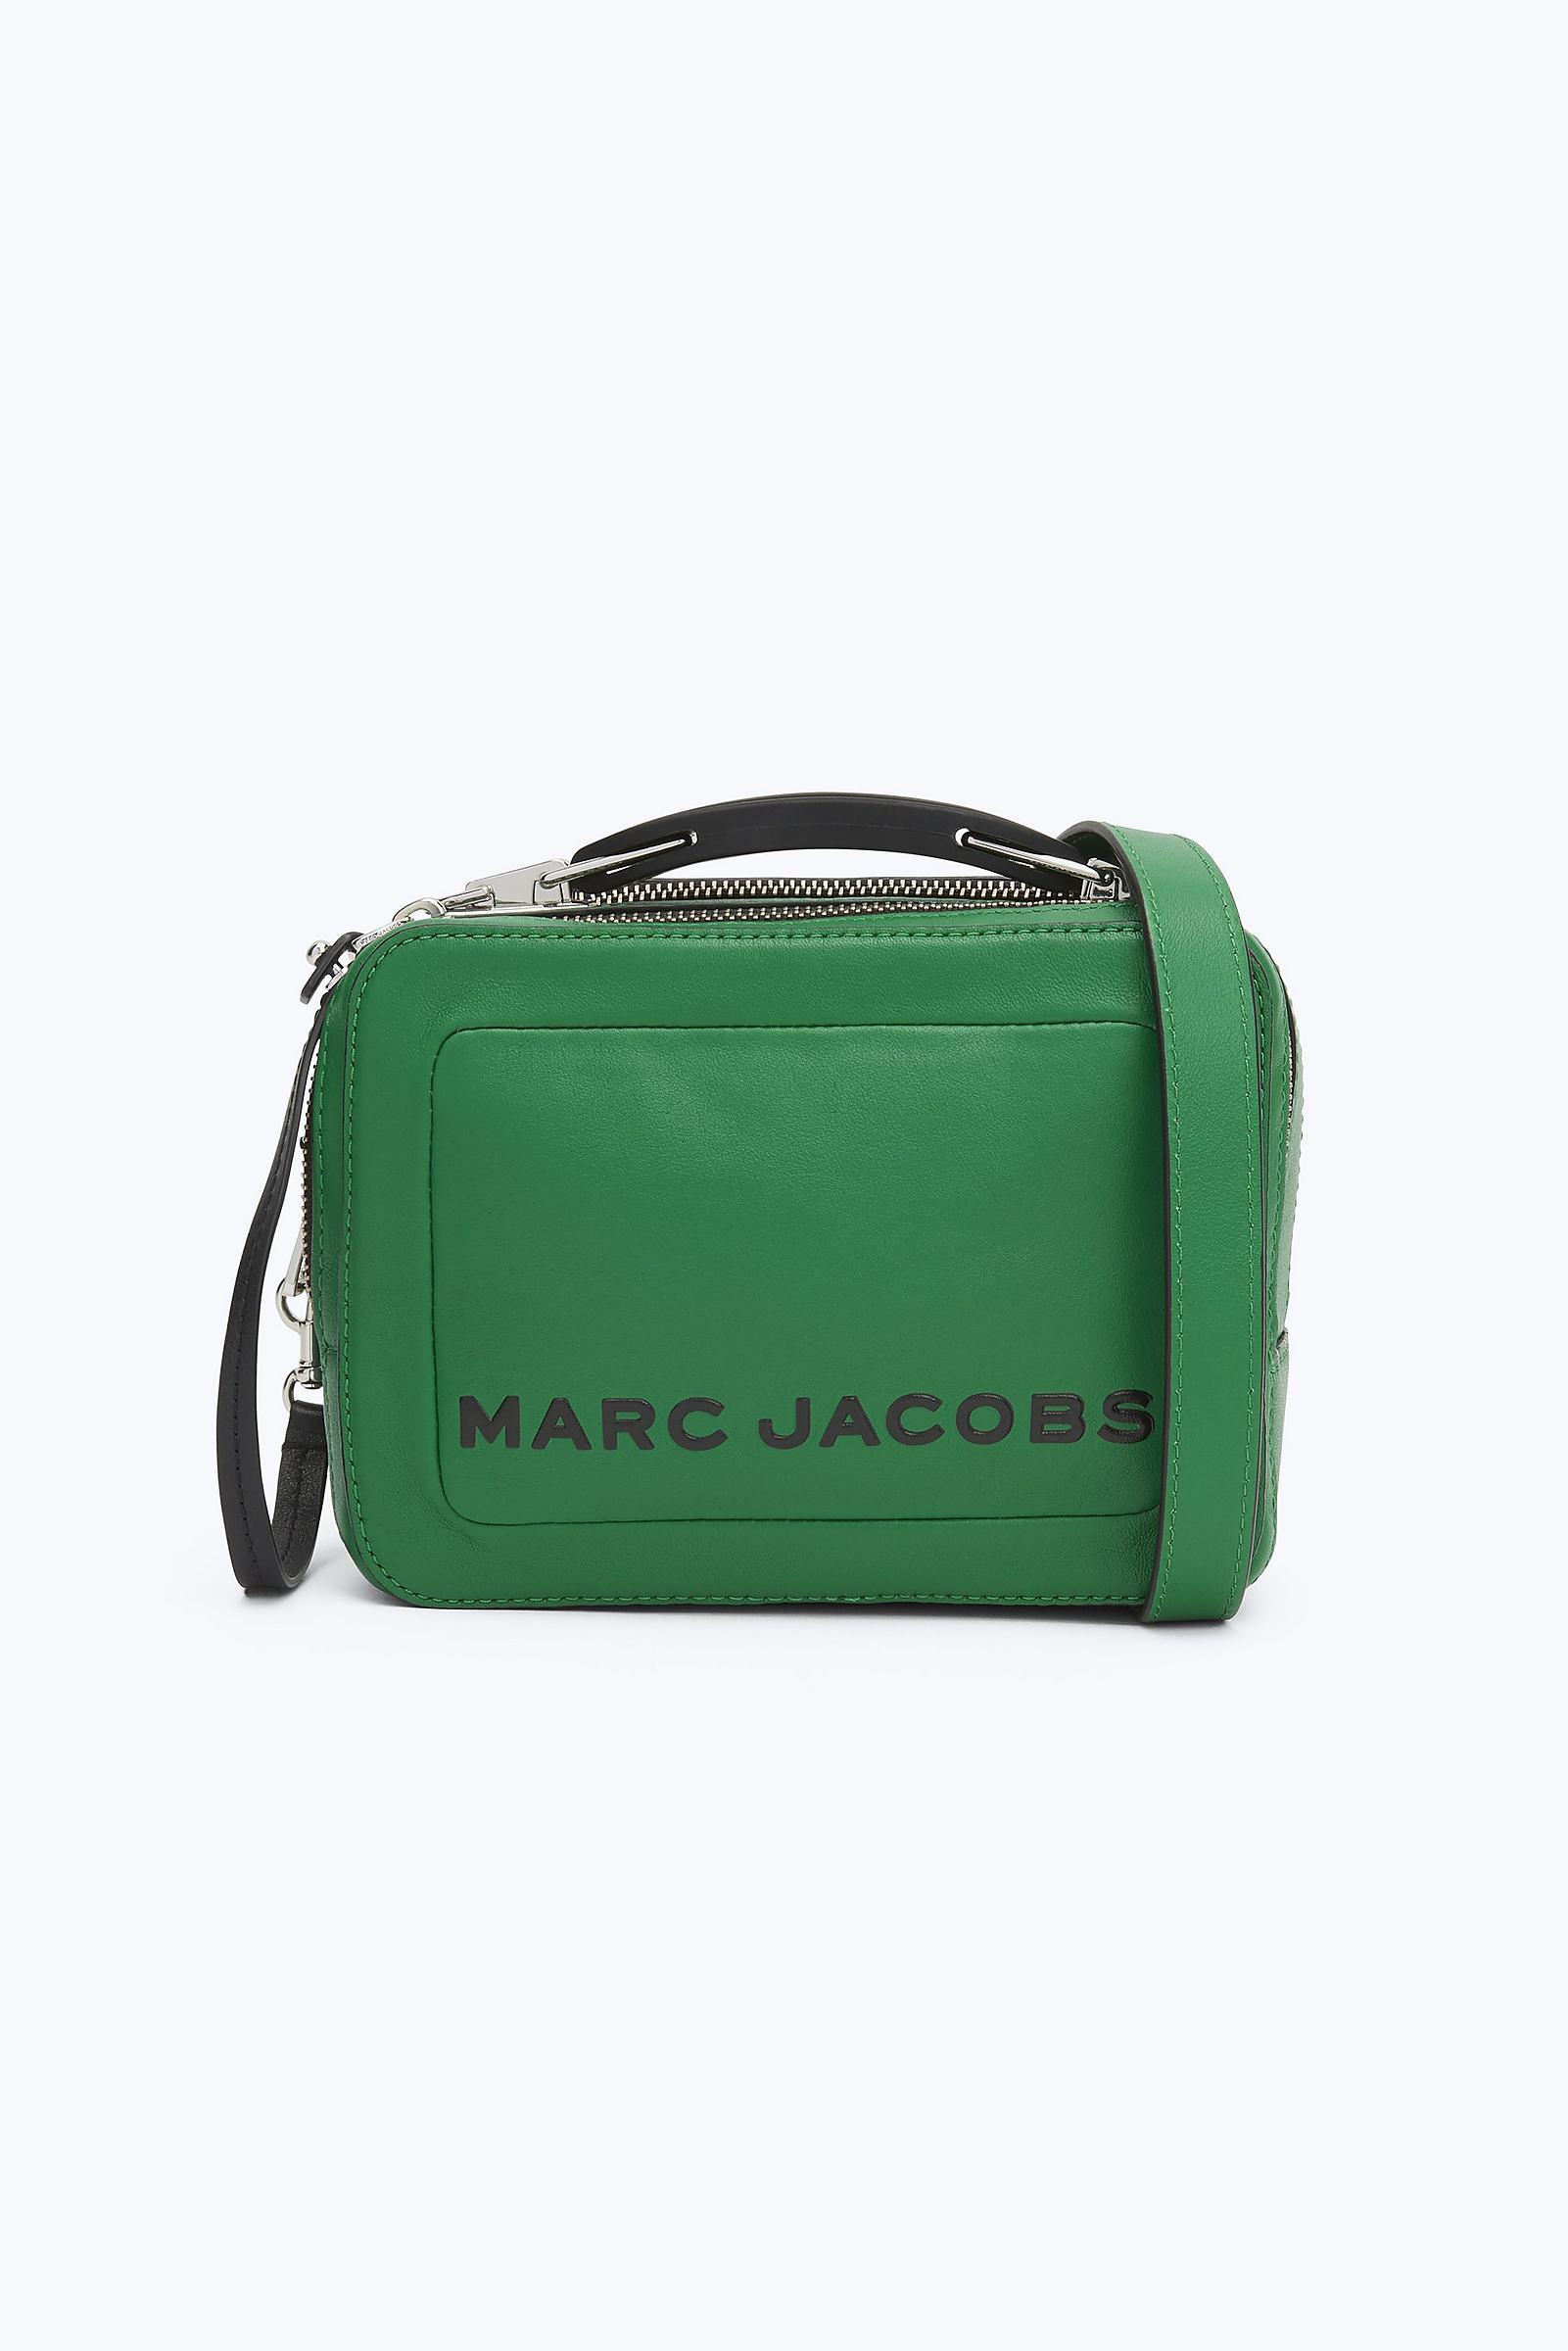 Marc Jacobs Mini Leather The Box Bag in Green - Lyst